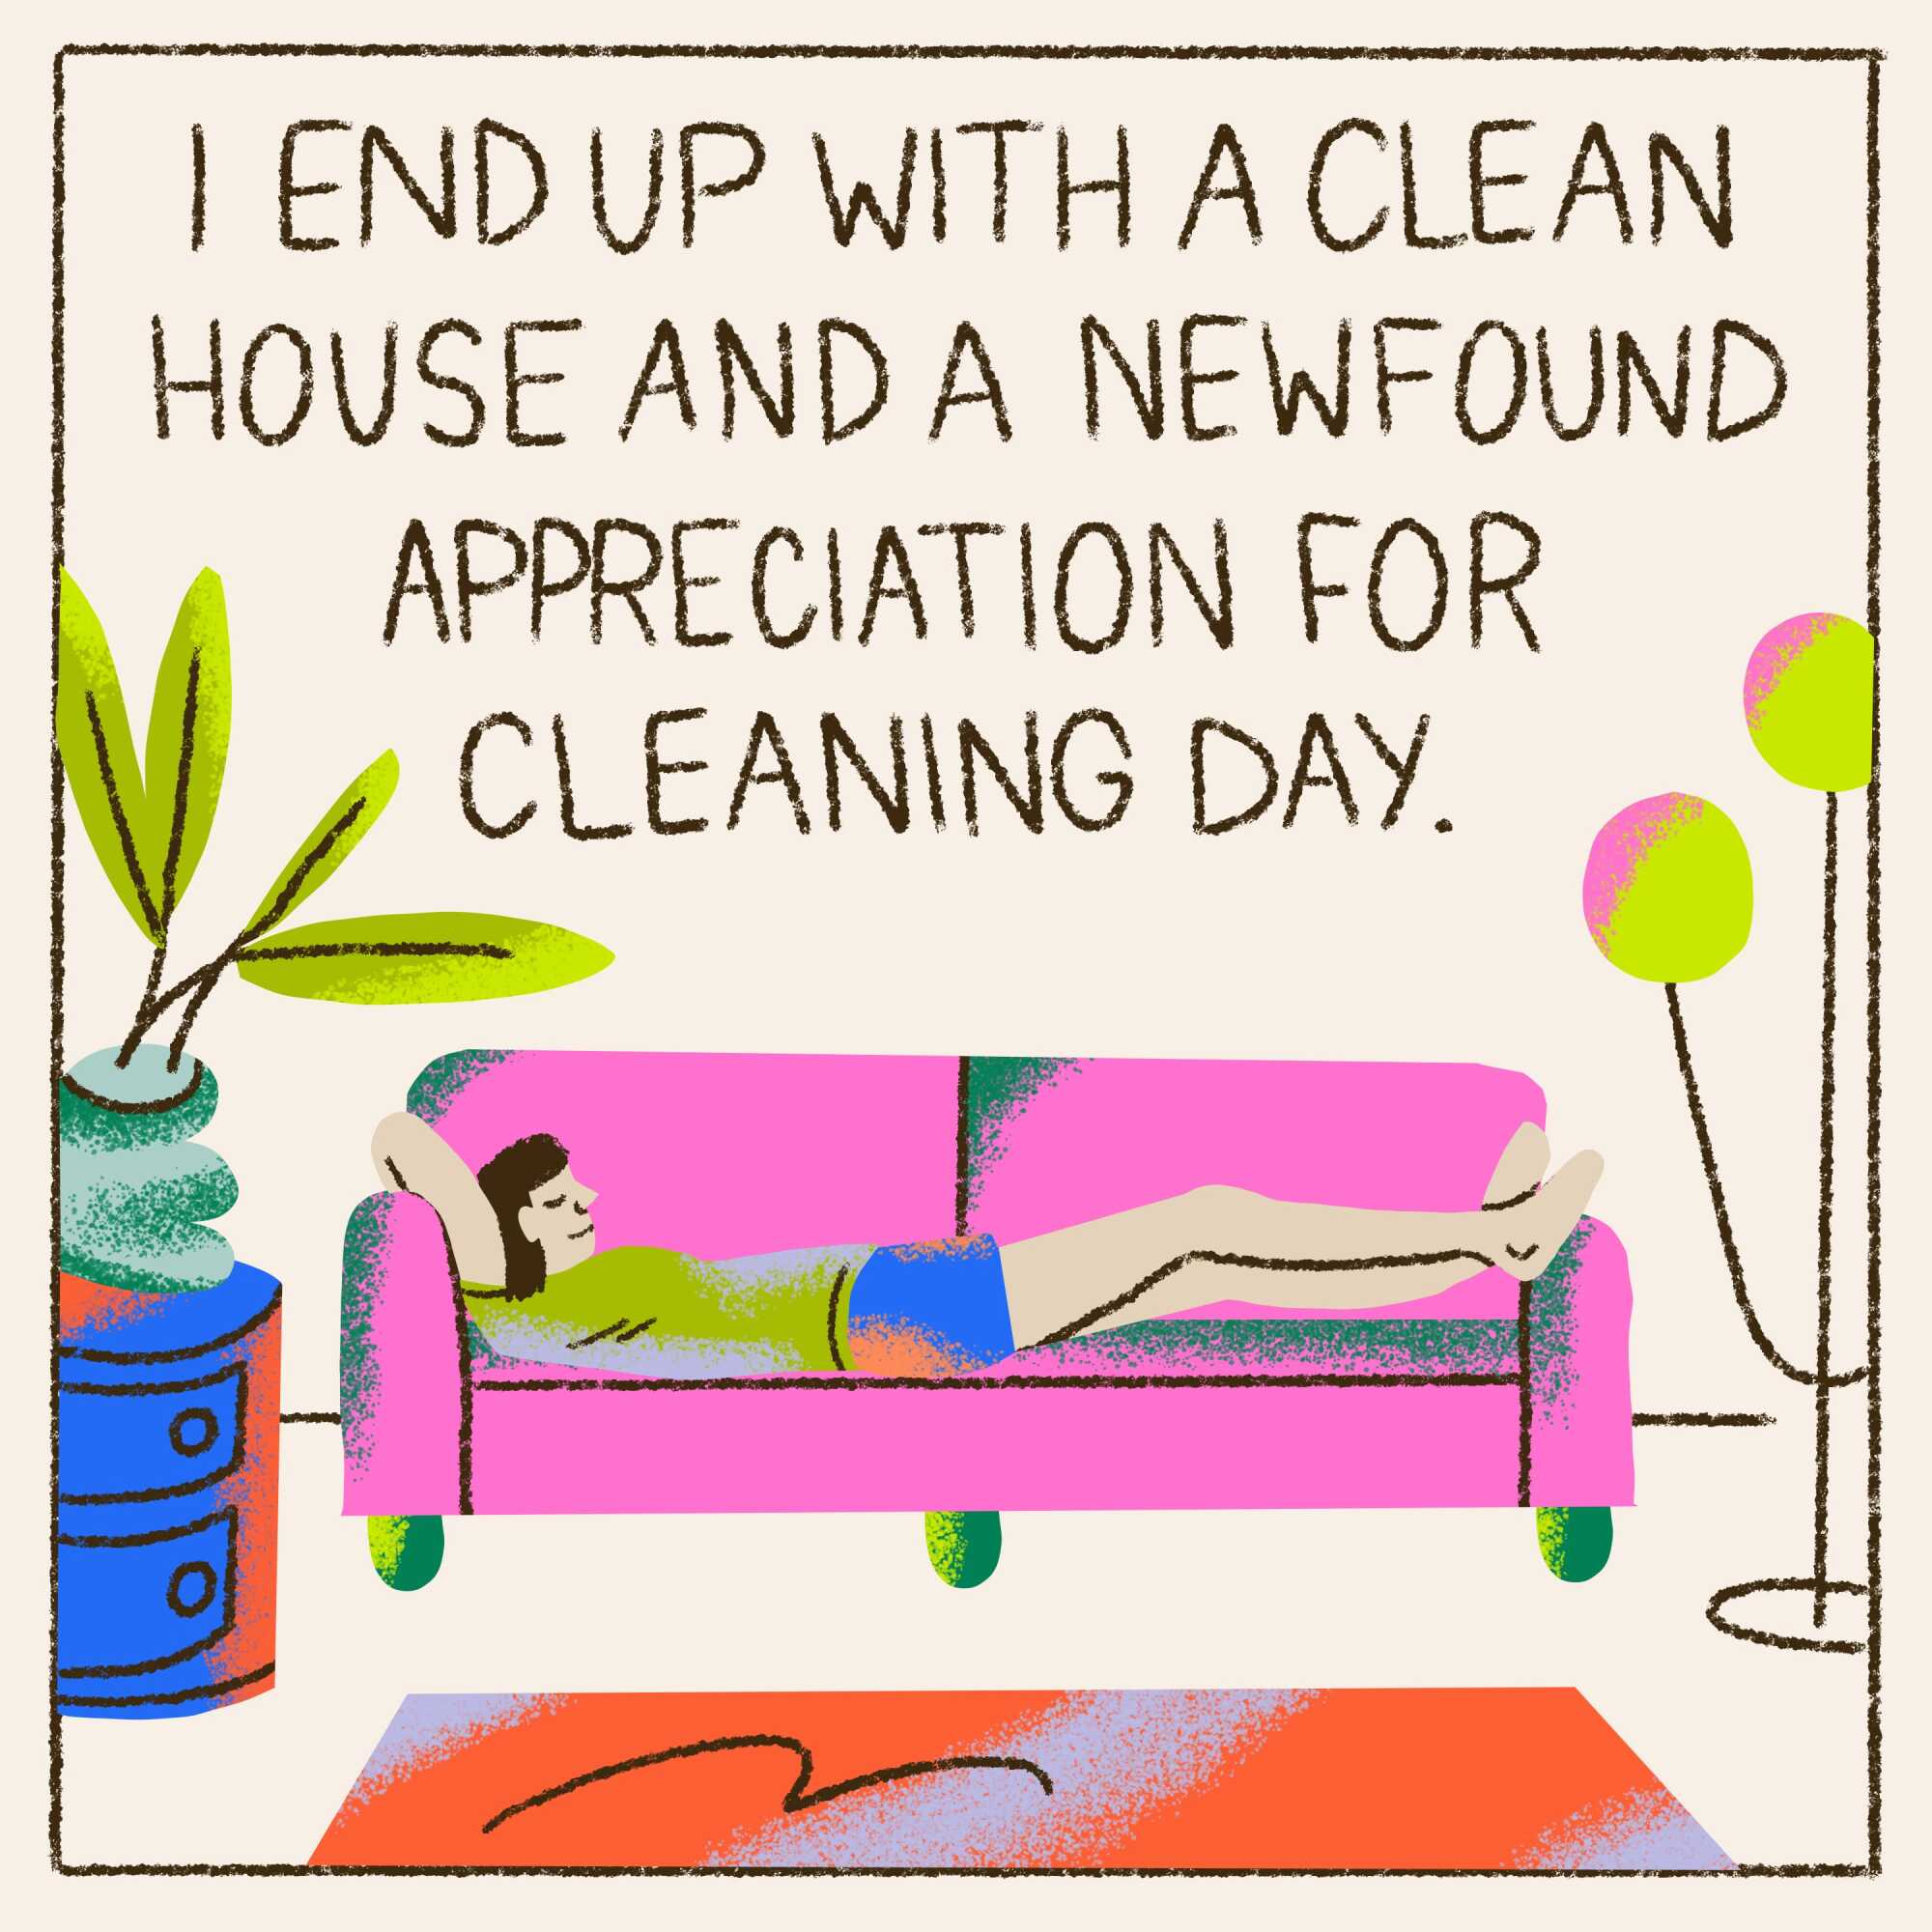 I end up with a clean house and a newfound appreciation for cleaning day. 